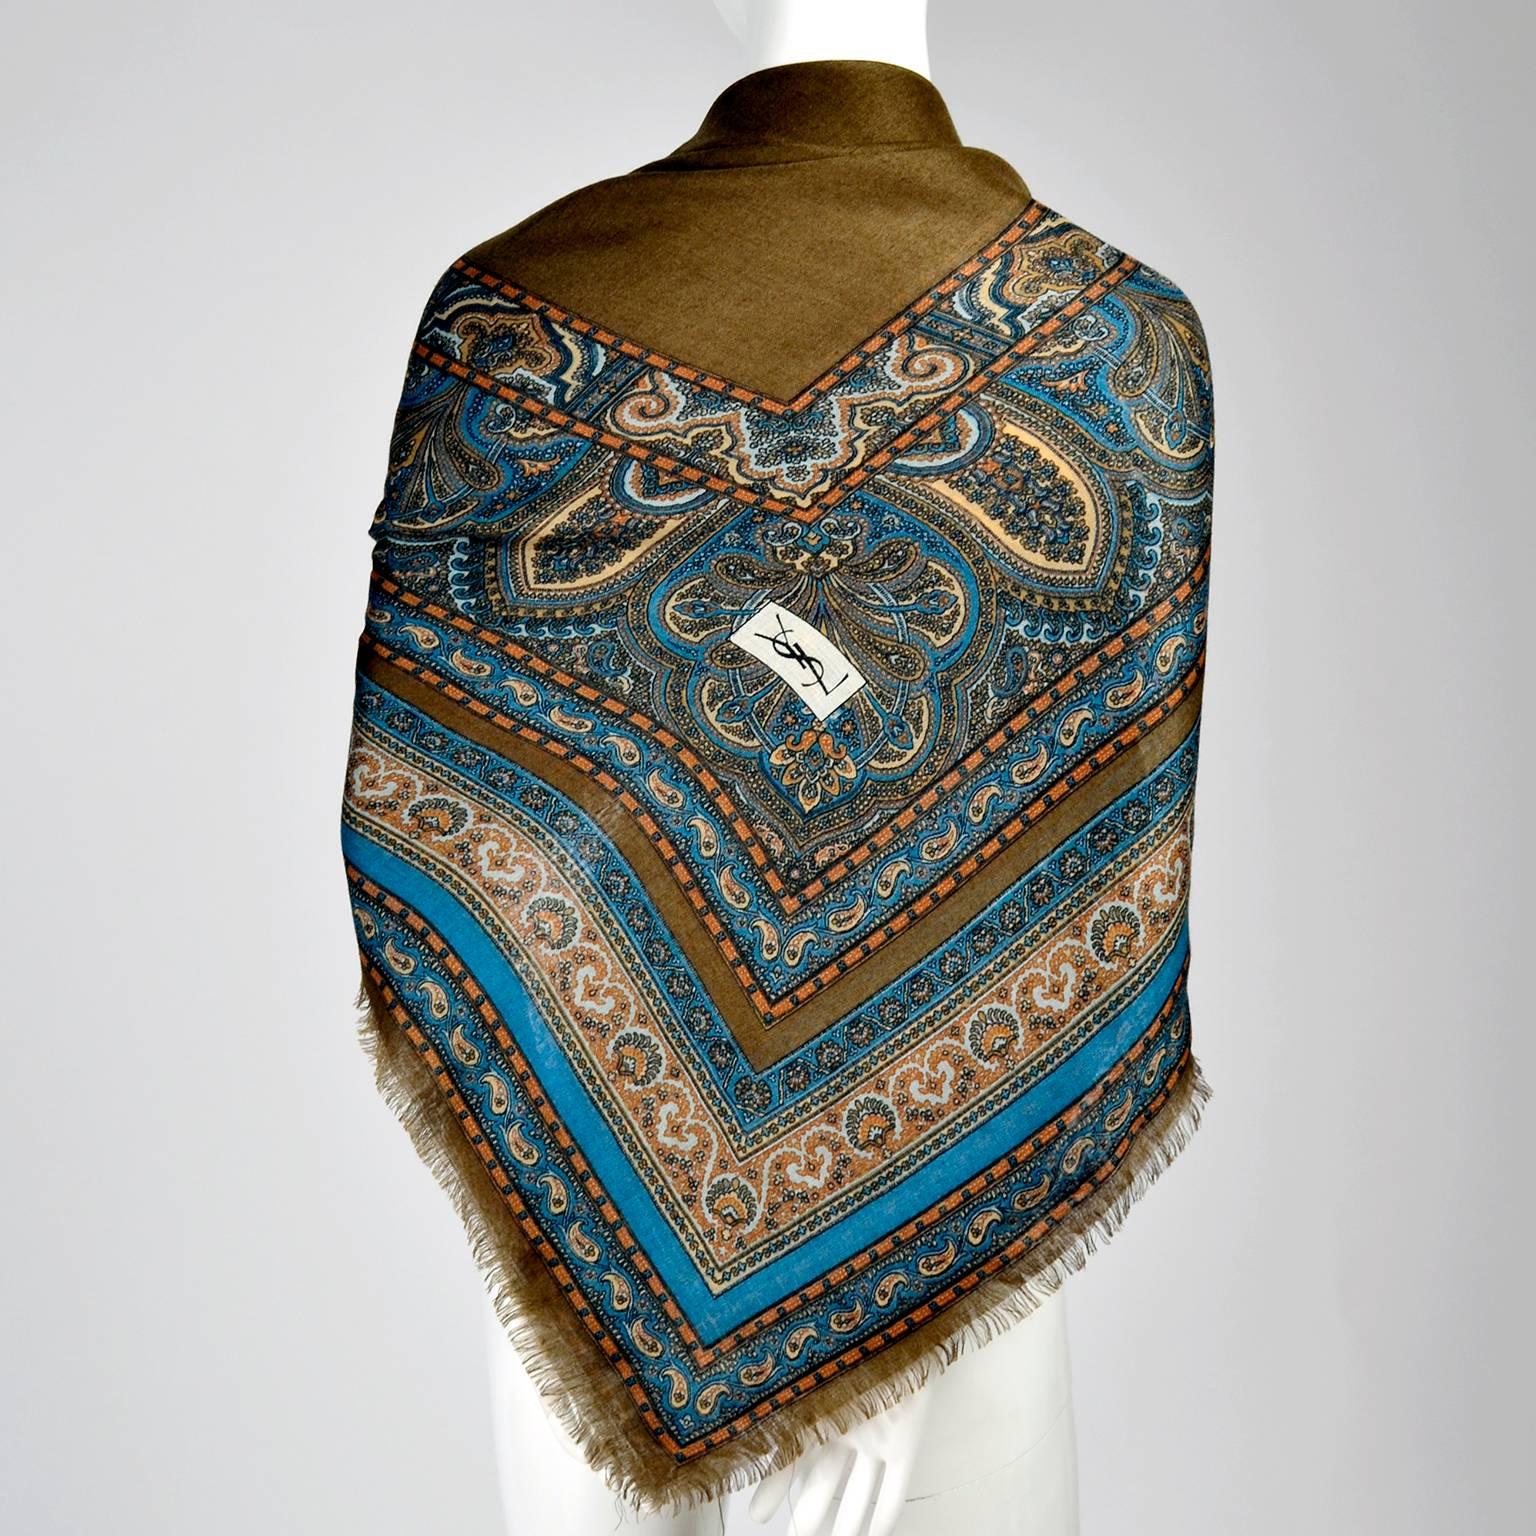 This is an outstanding Yves Saint Laurent ultra fine wool scarf in rich tones of brown, blue and copper measuring 52